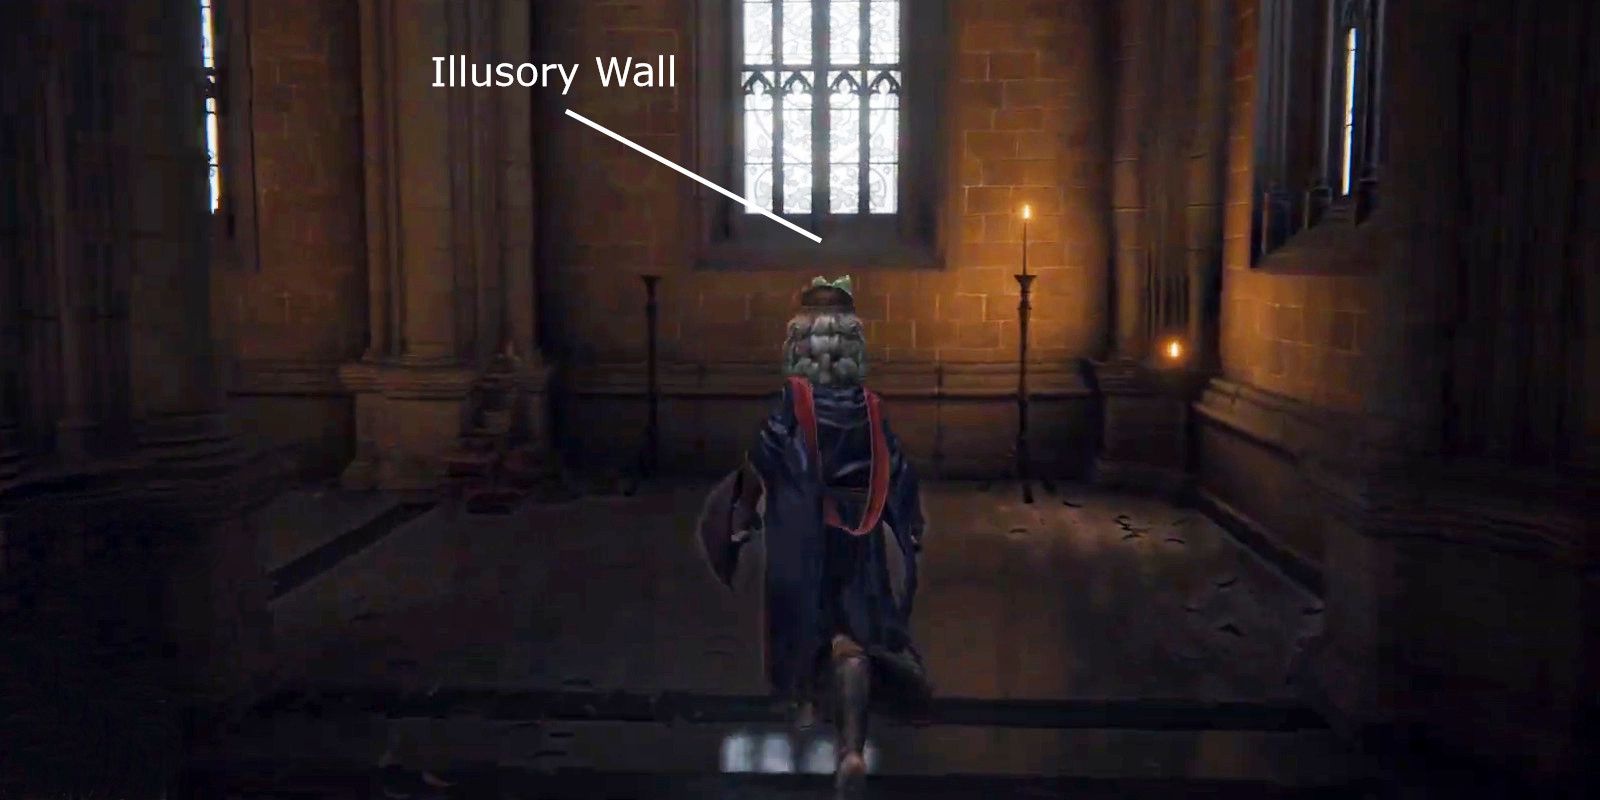 An image of an Elden Ring player inside the Academy of Raya Lucaria with an illusory wall highlighted